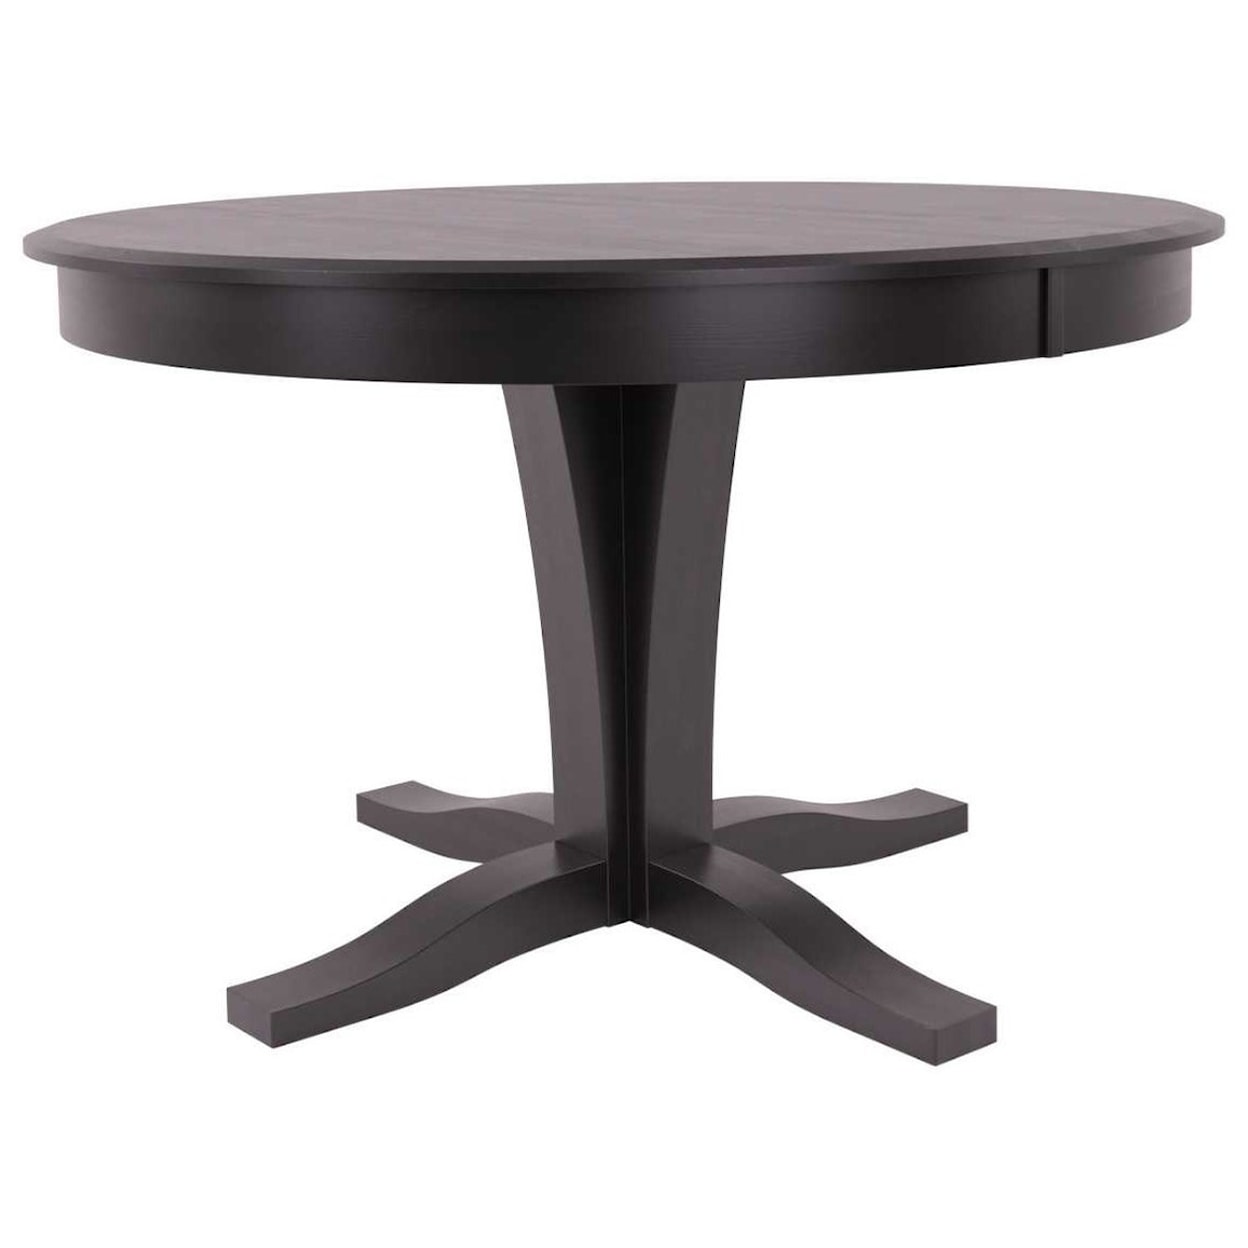 Canadel Gourmet. Customizable Round Table w/ Pedestal